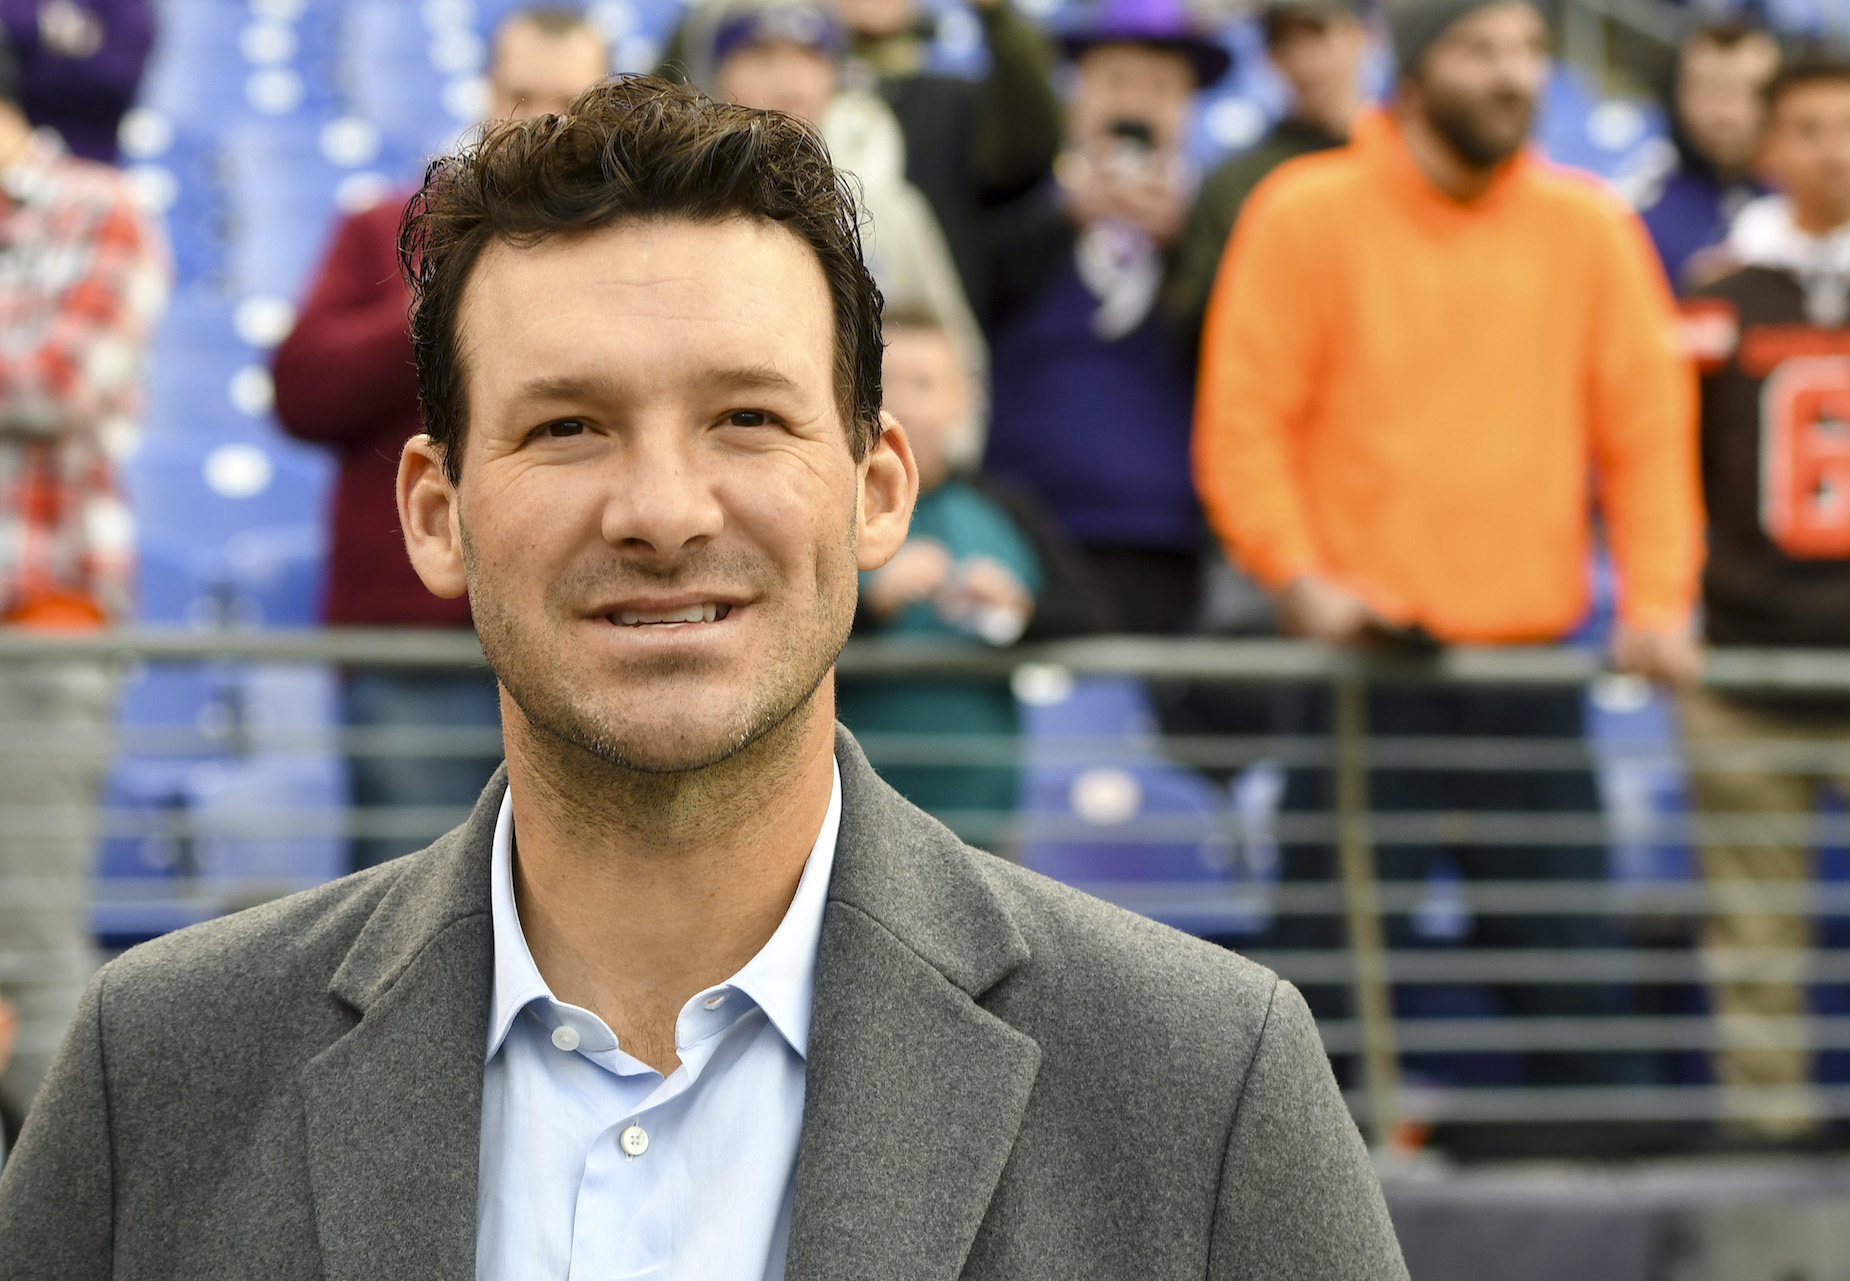 Tony Romo Revealed That He Changed a Signature Part of His Broadcasting Skill Set During the 2020 NFL Season